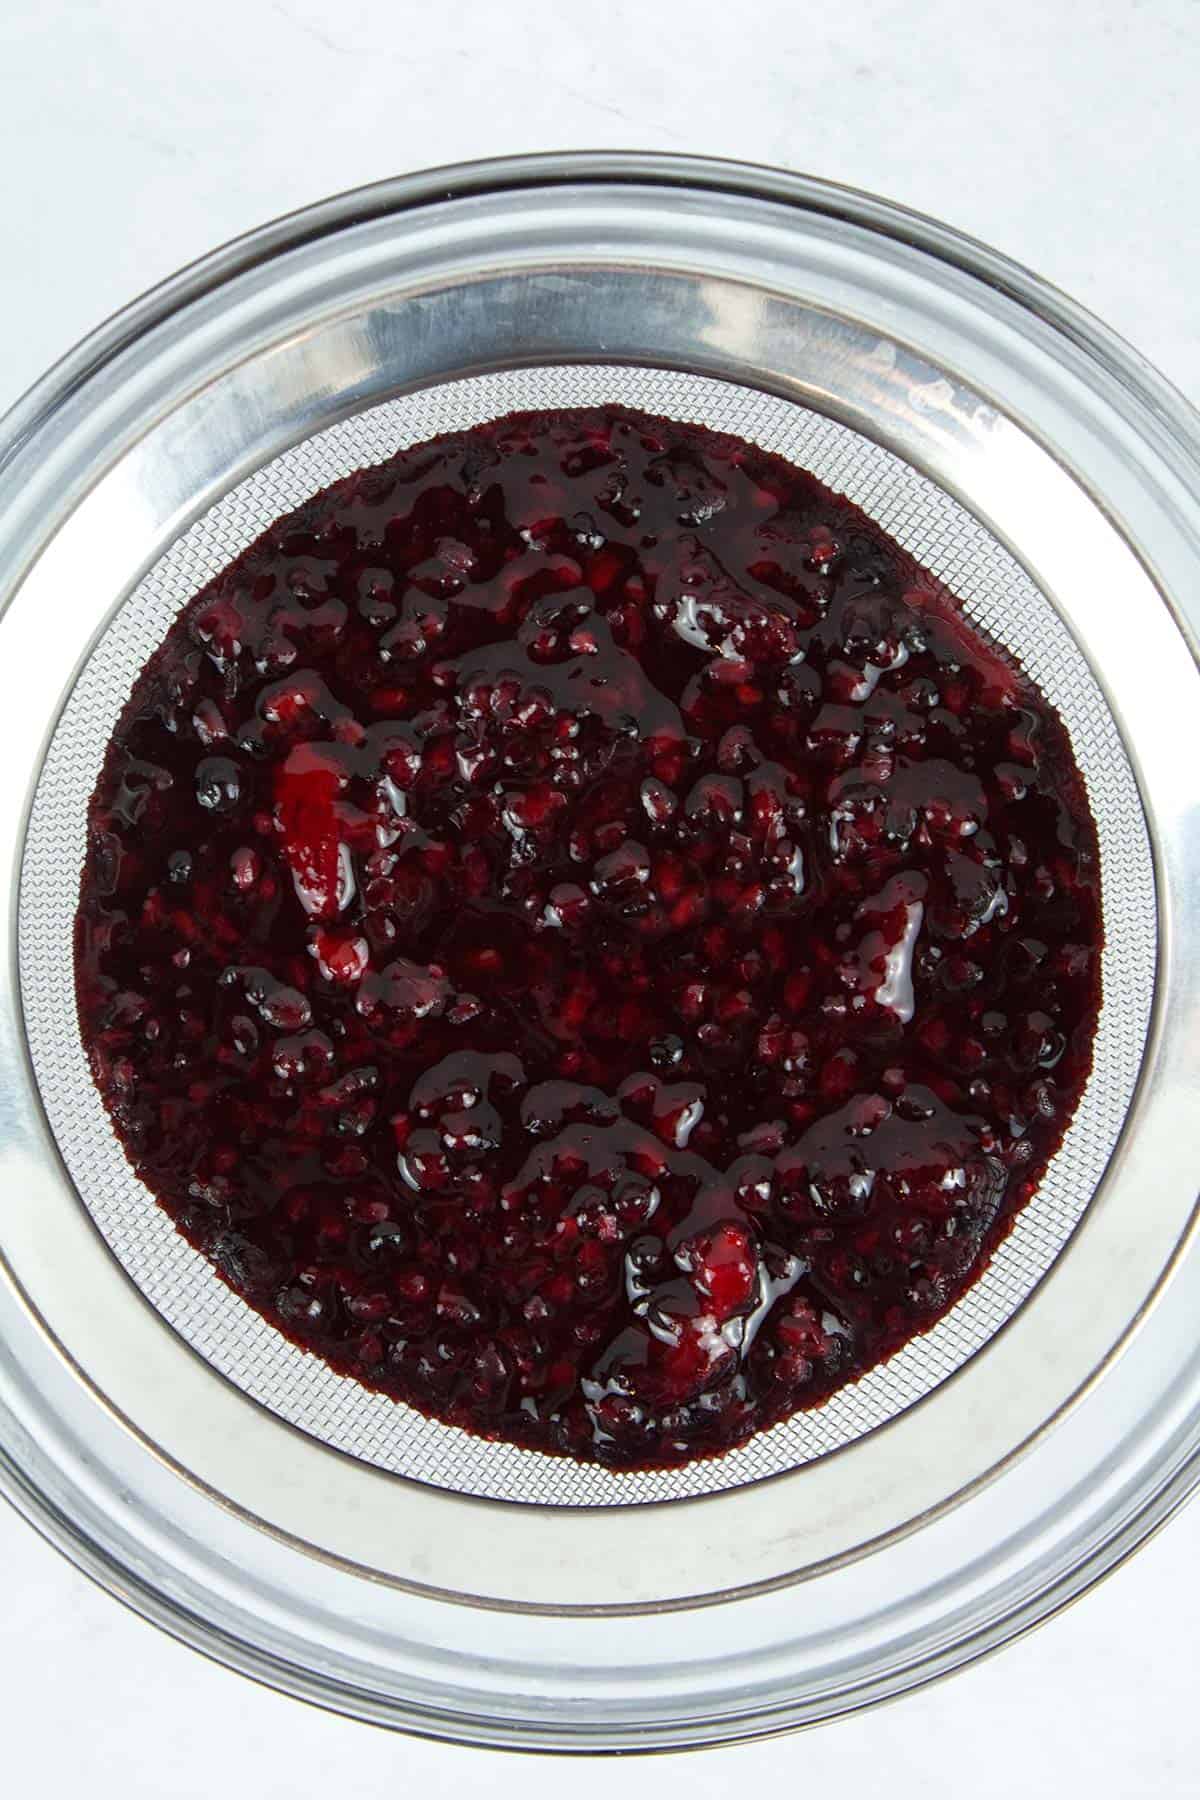 Straining berries for fruit filling to be used in cakes, pies, or tarts.